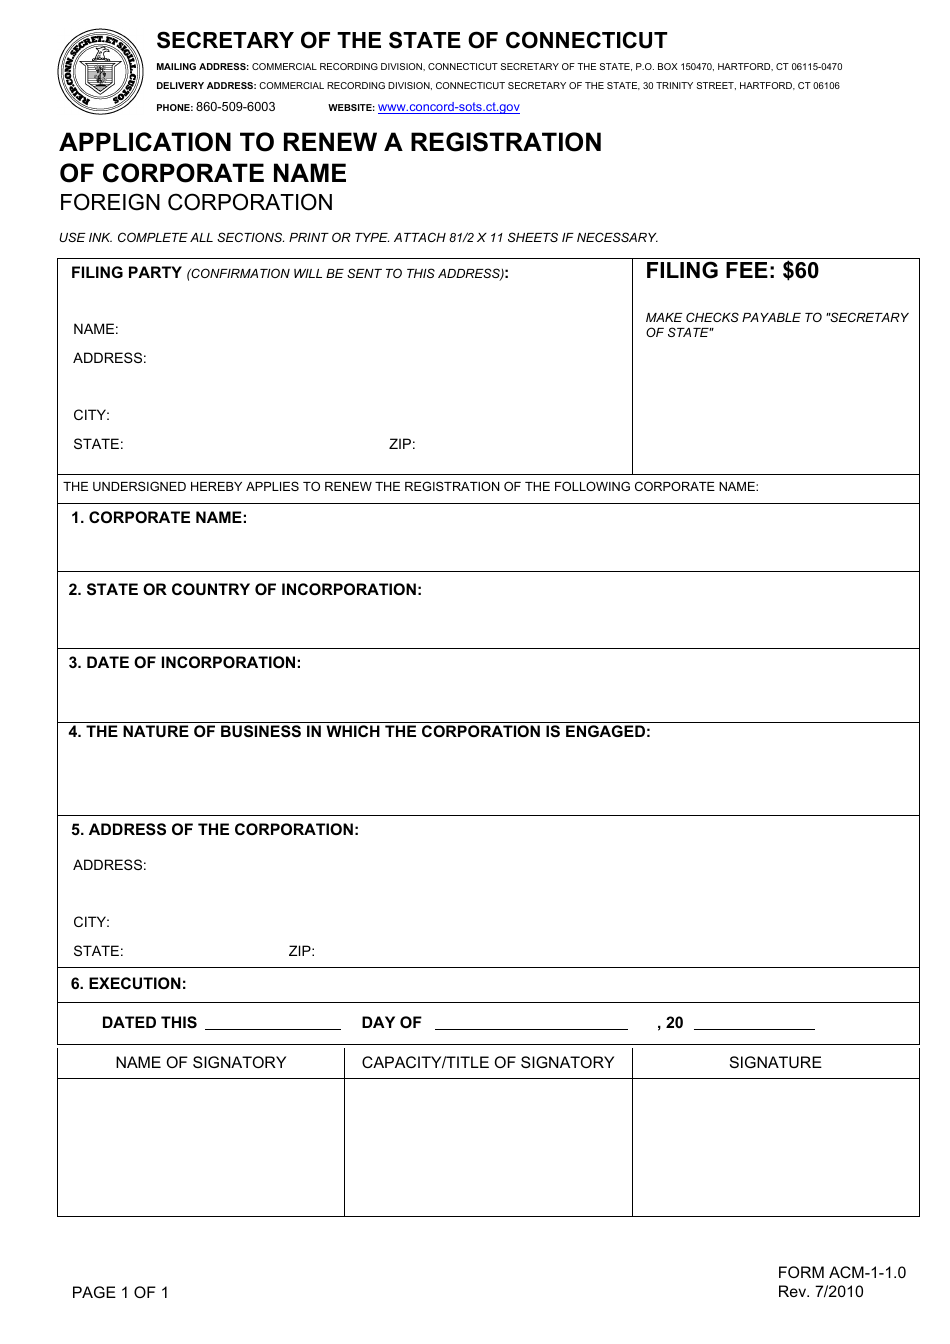 Form ACM-1-1.0 Application to Renew a Registration of Corporate Name - Connecticut, Page 1